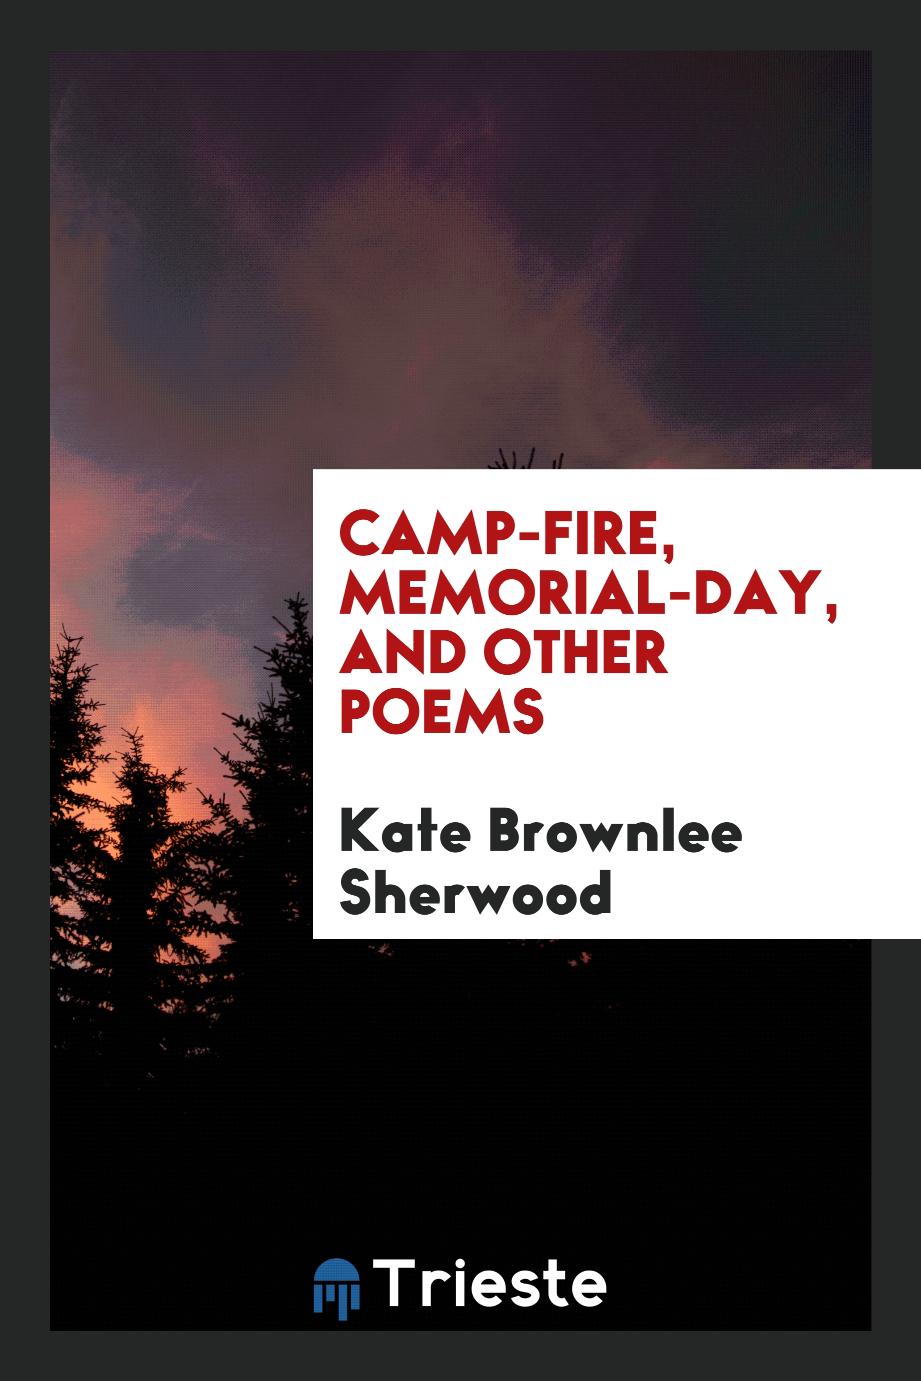 Camp-fire, Memorial-day, and other poems